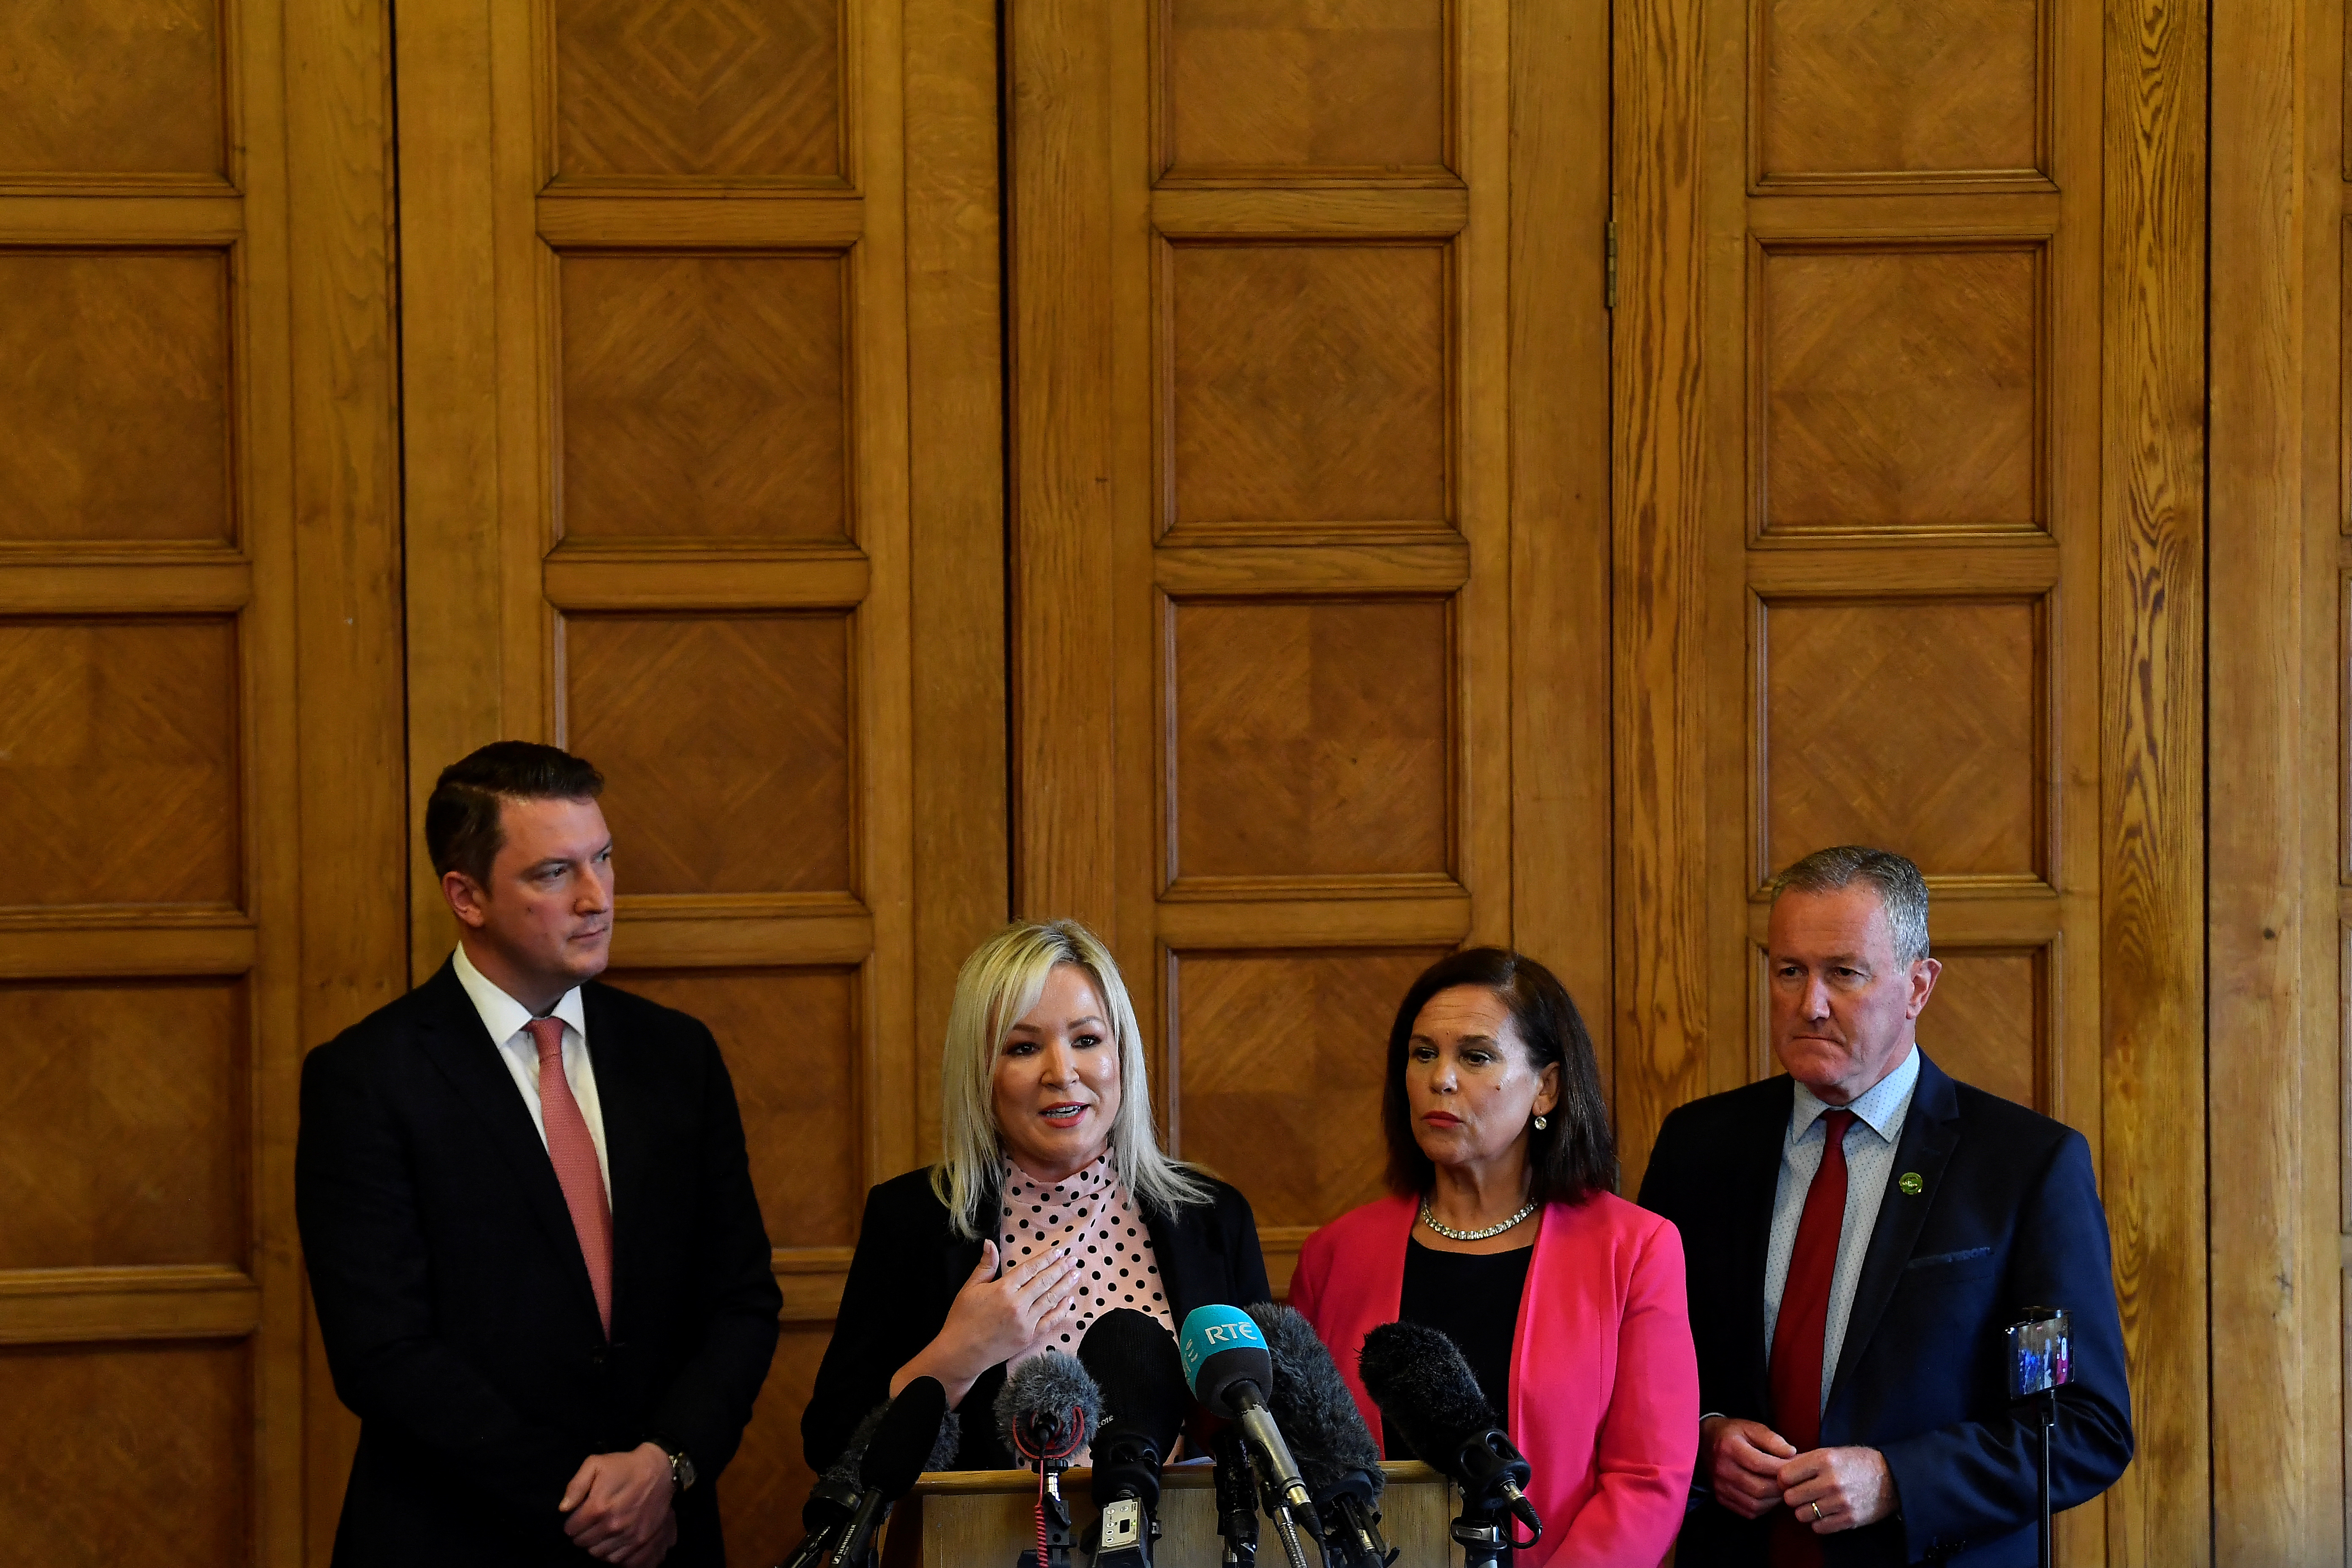 Sinn Fein leaders speak during a press conference at Stormont parliament buildings, in Belfast, Northern Ireland